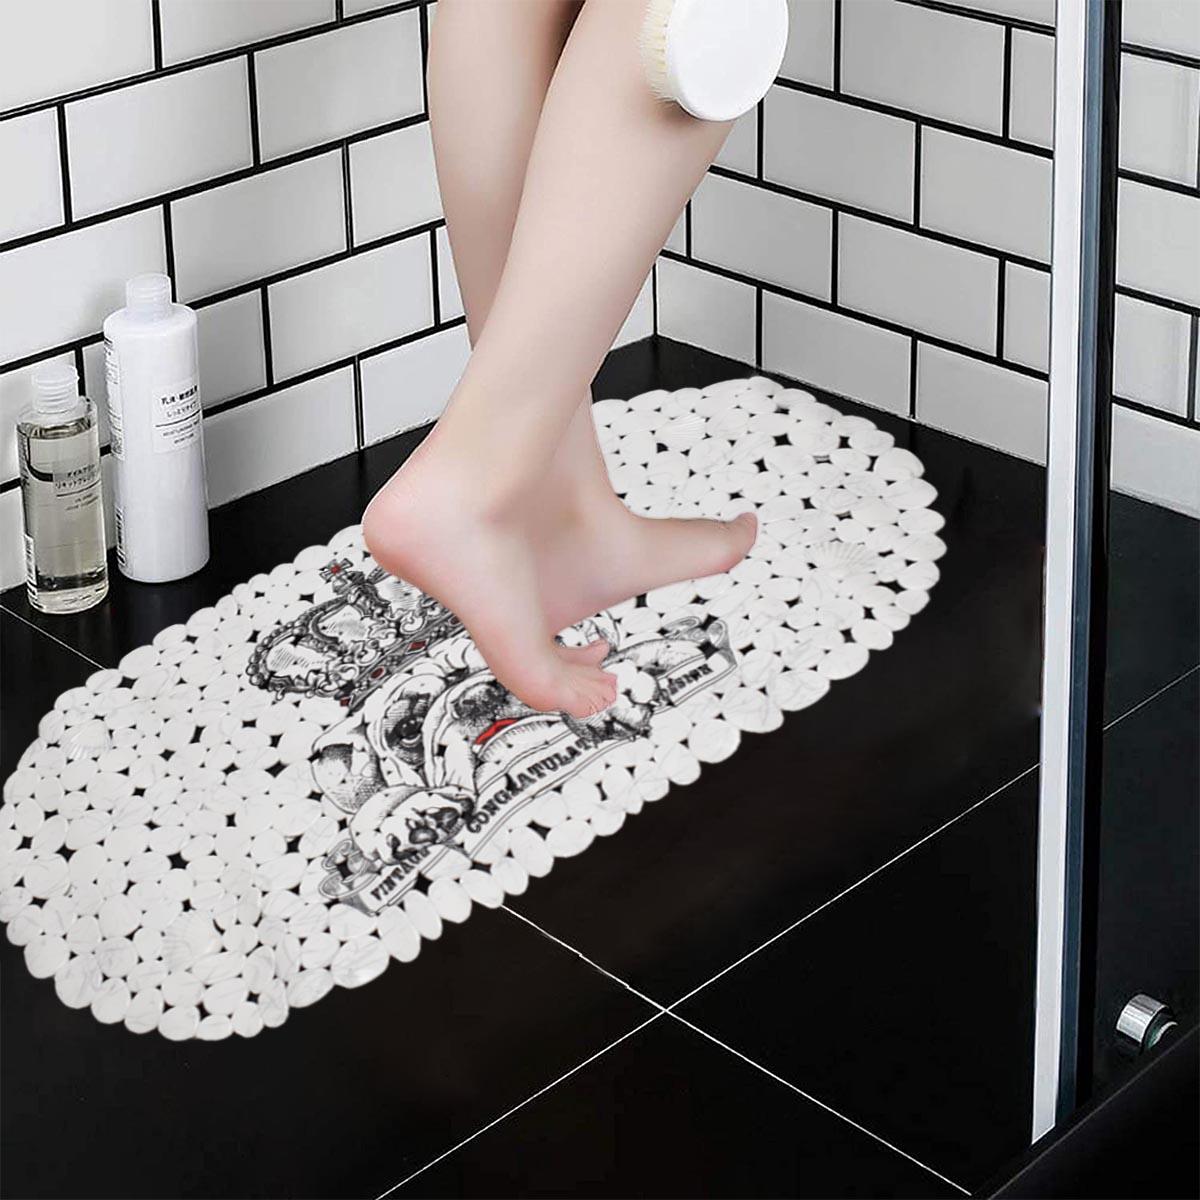 Kookee PVC Bath Mat Non-Slip Pebble Bathtub Mat L=69cm x W=35cm (for Smooth/Non-Textured Tubs Only) Safe Shower Mat with Drain Holes, Suction Cups for Bathroom (92-4935)